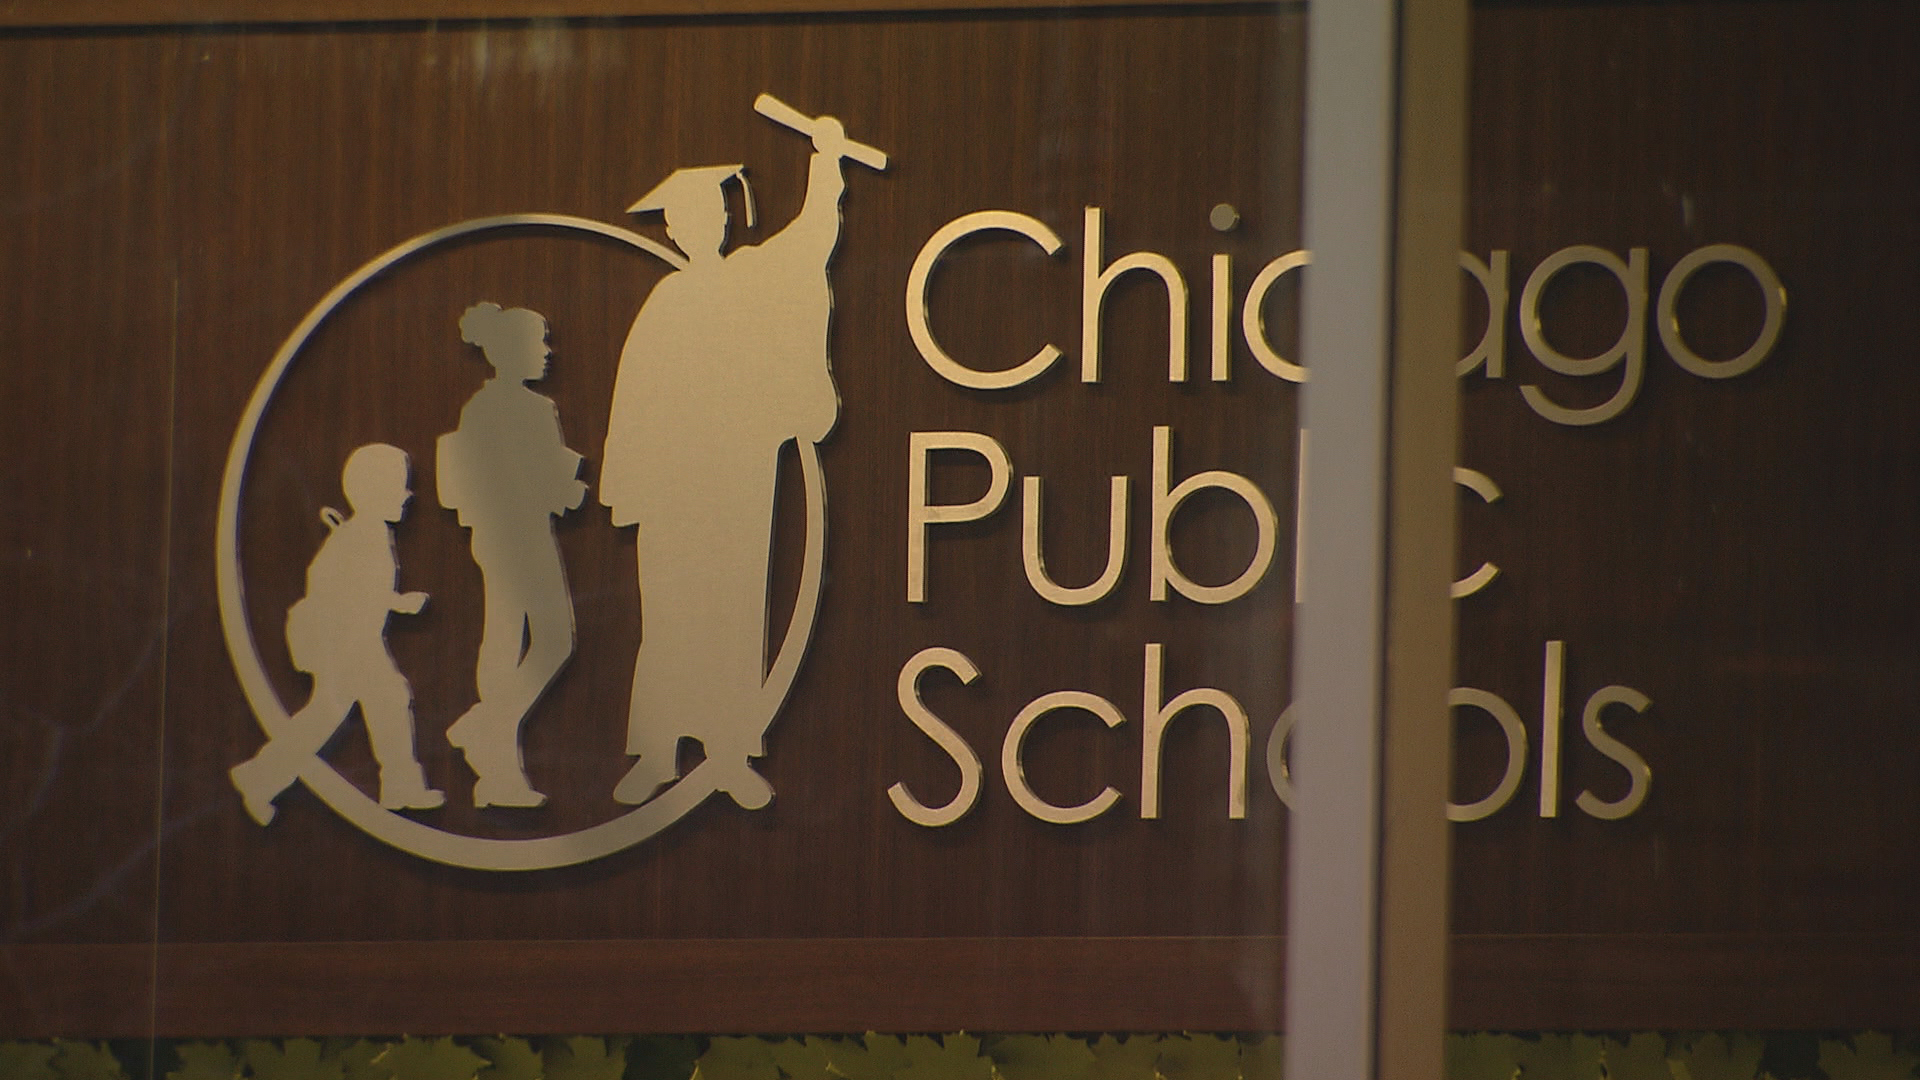 Cps Principal Reinstated After Serious Errors Found In WatcHDog